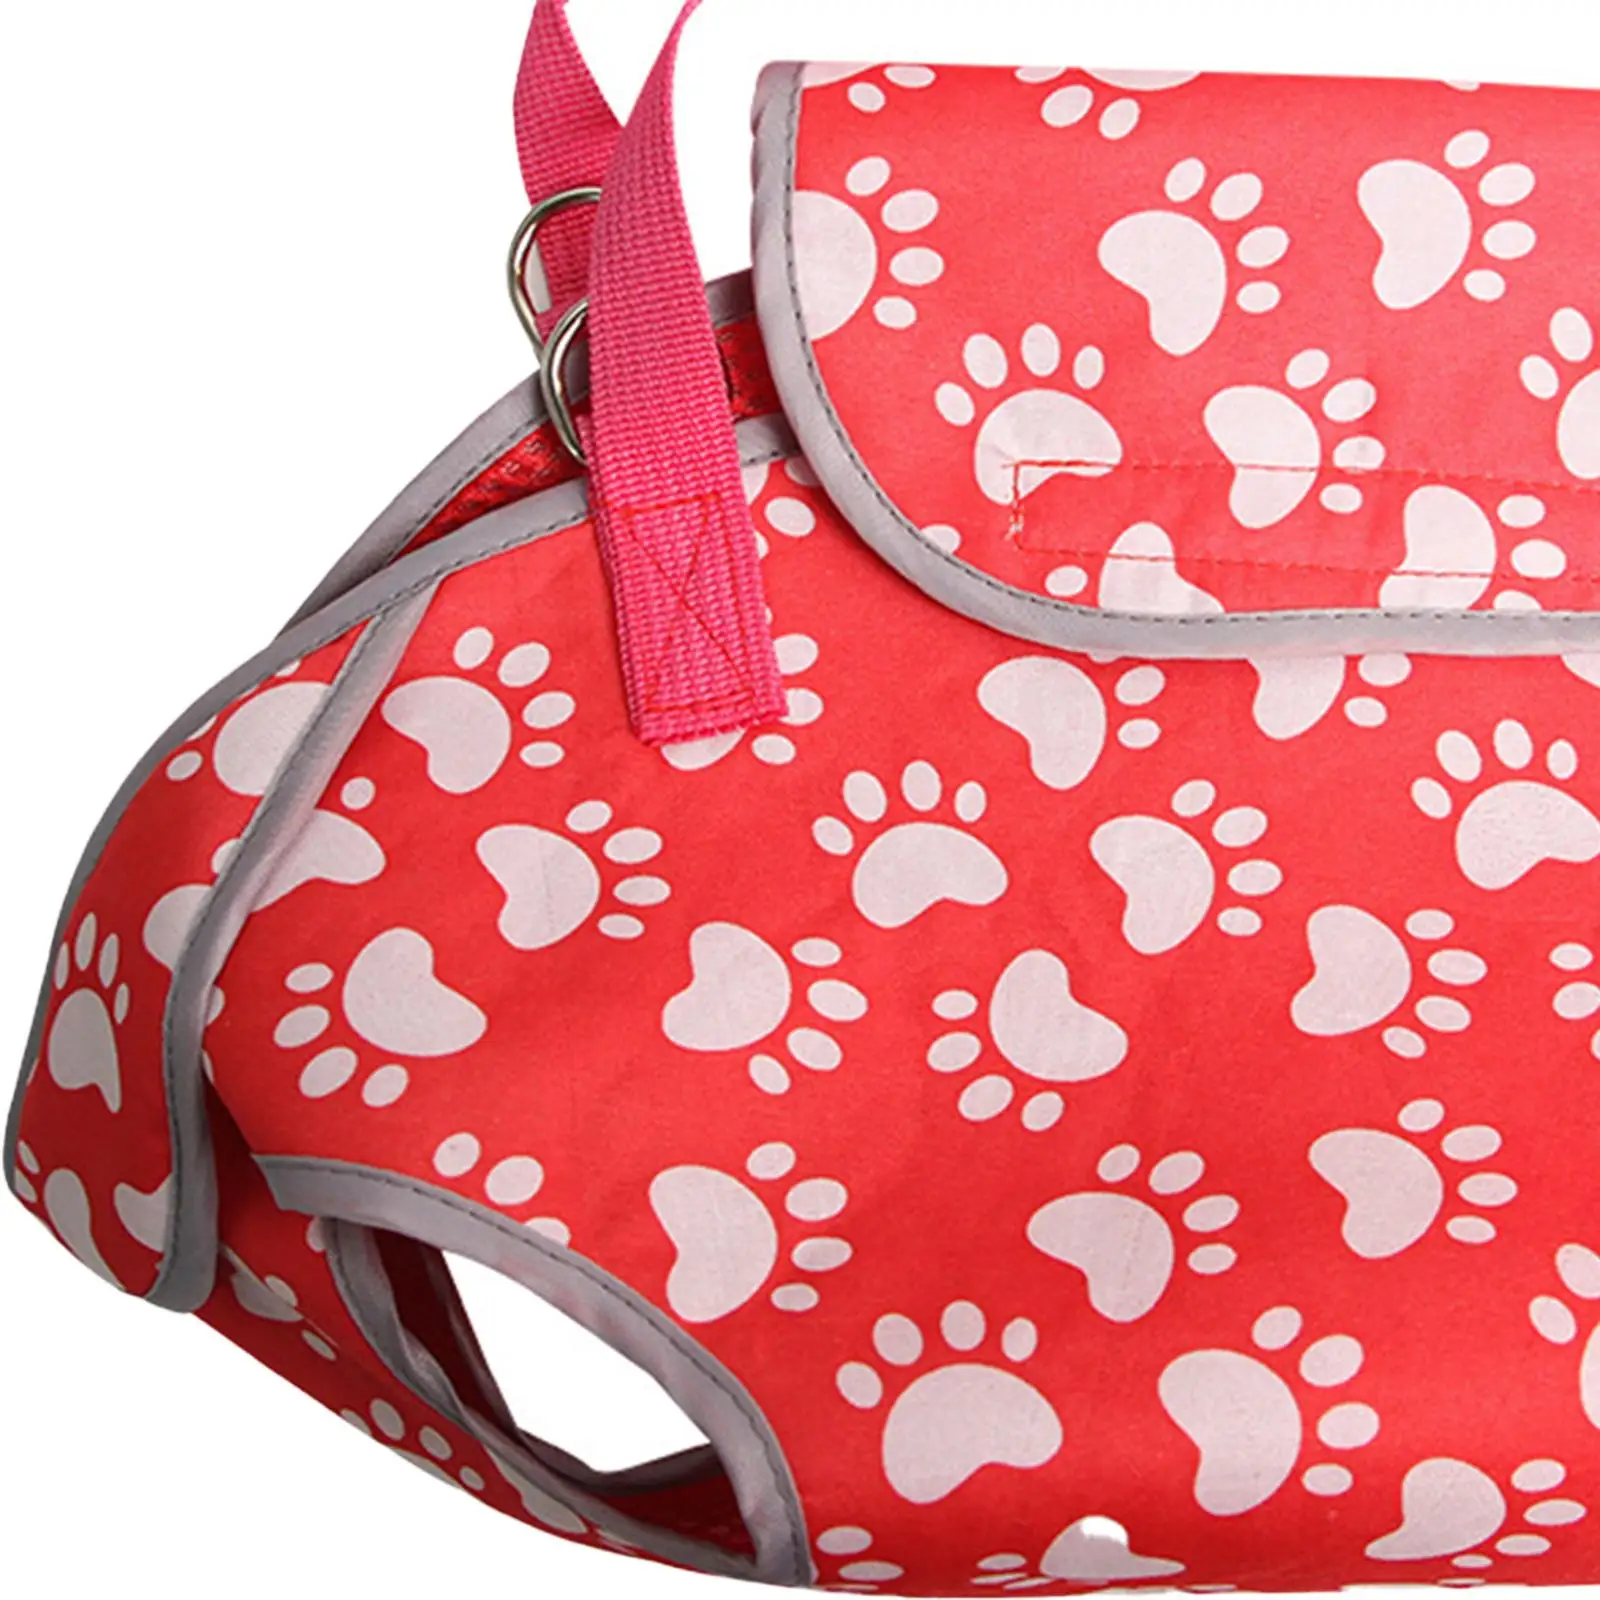 Dog Carrier Handbag Kennel Cage Pouch Adjustable Travel Bag Cat Carrier Leg Out Pet Carrier for Small Dogs Kitten Hiking Outdoor